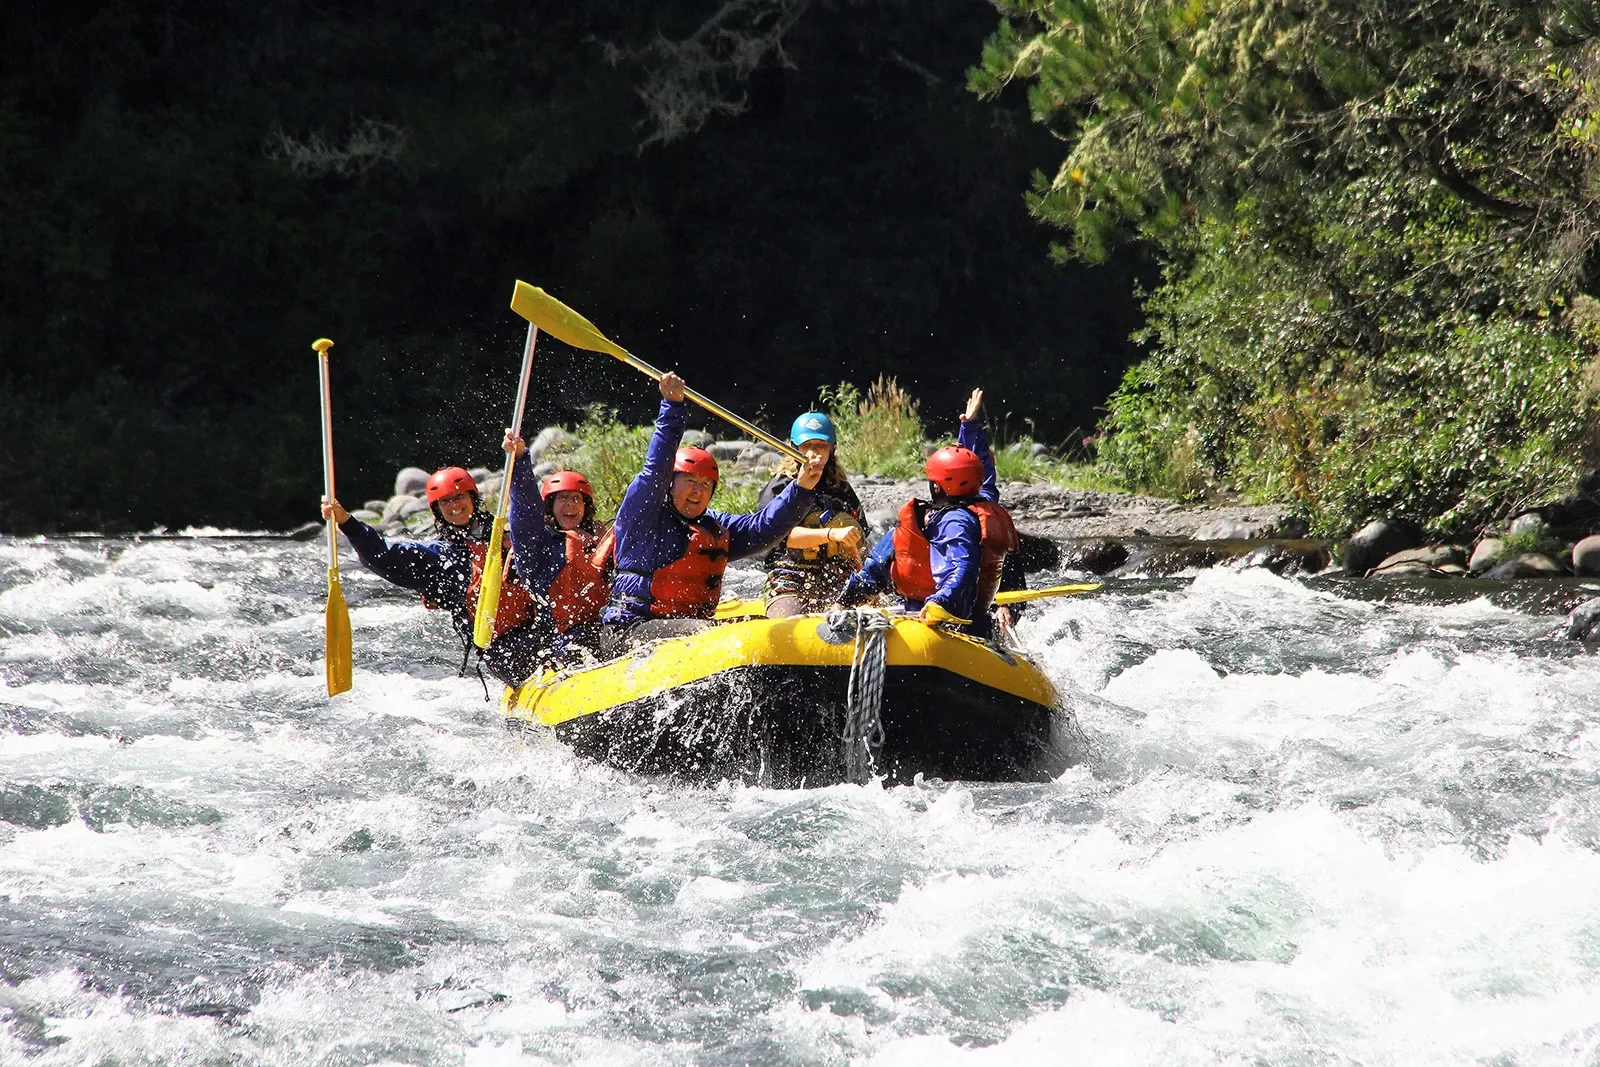 Five guests whit water rafting, all raising oars.